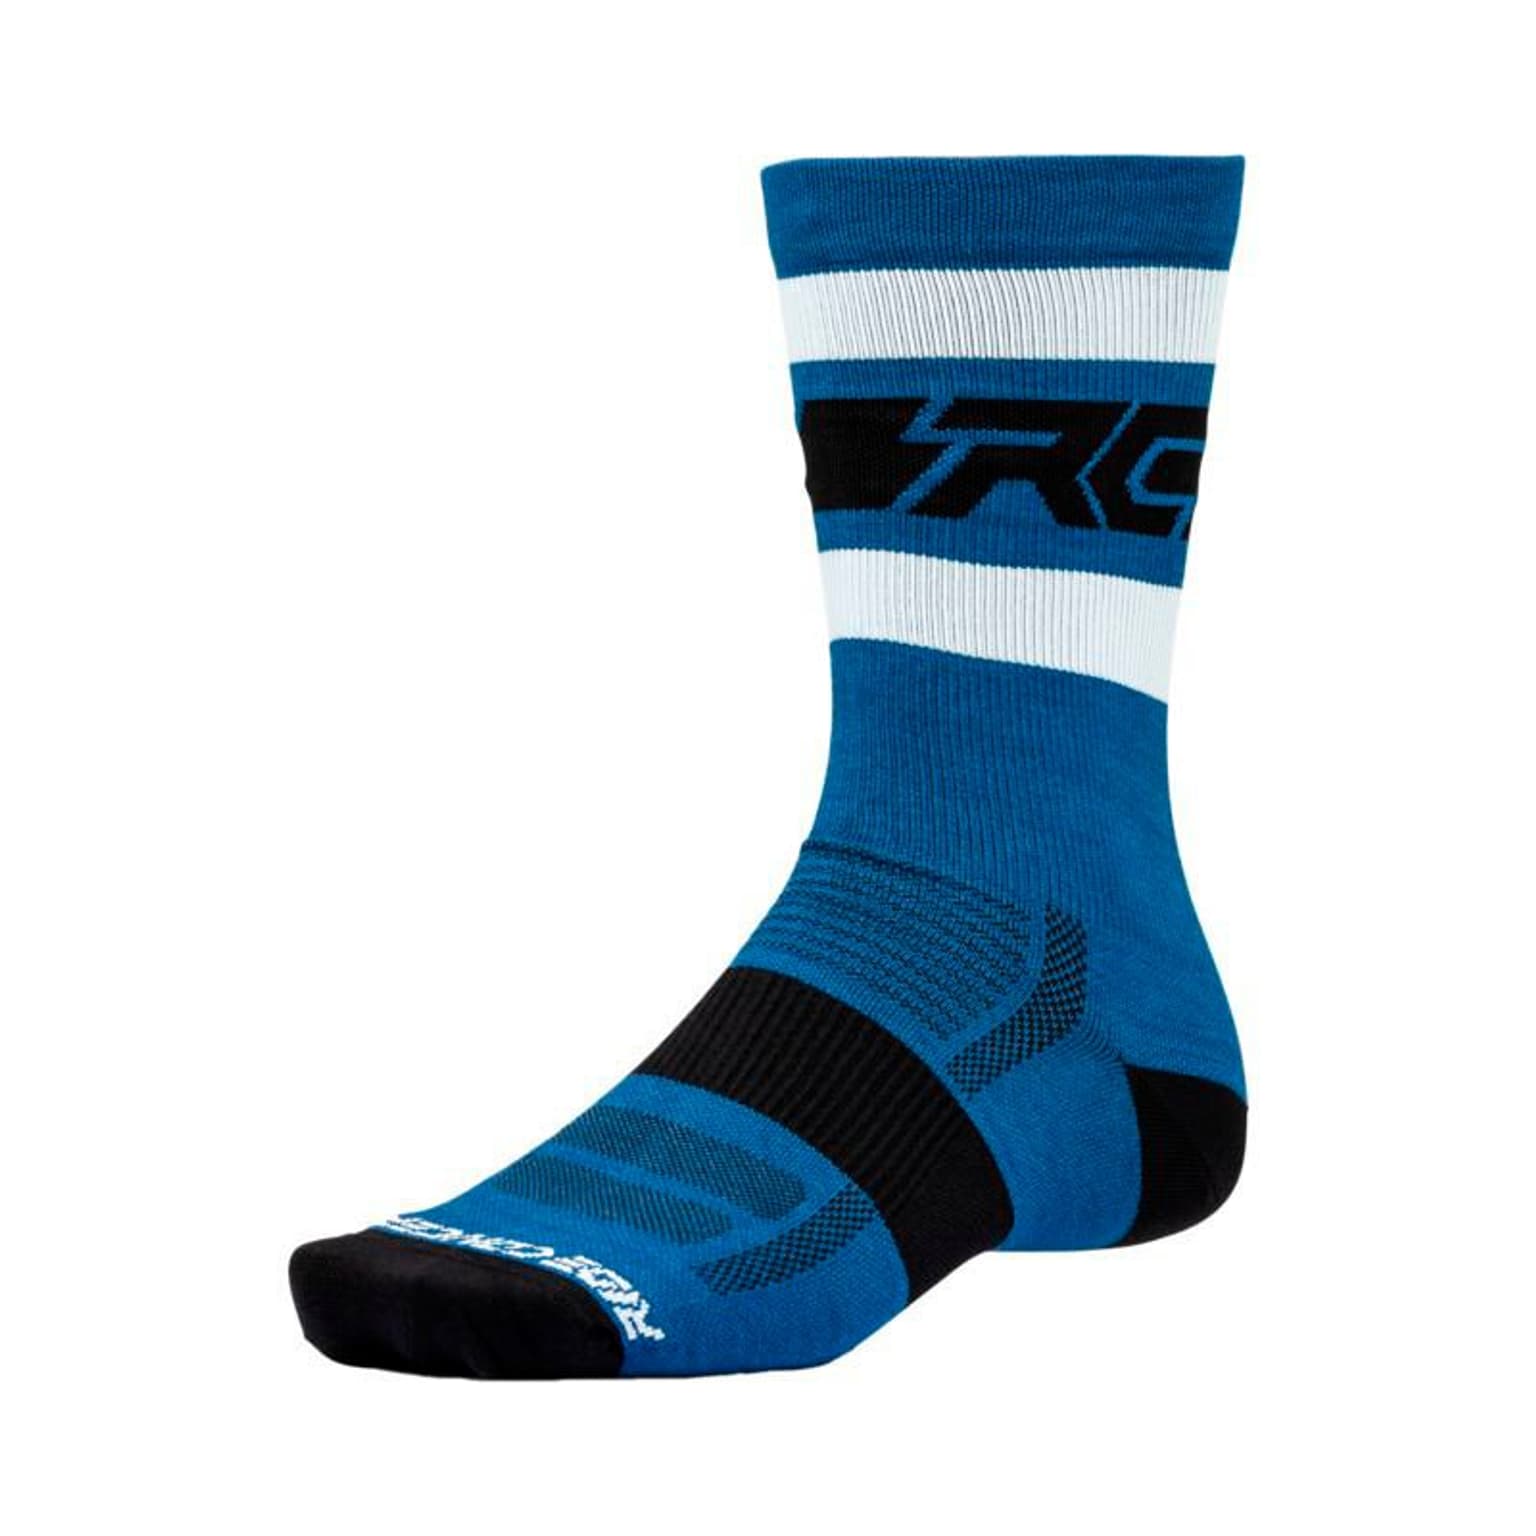 Ride Concepts Ride Concepts Woll Fifty-Fifty Velosocken bleu 1